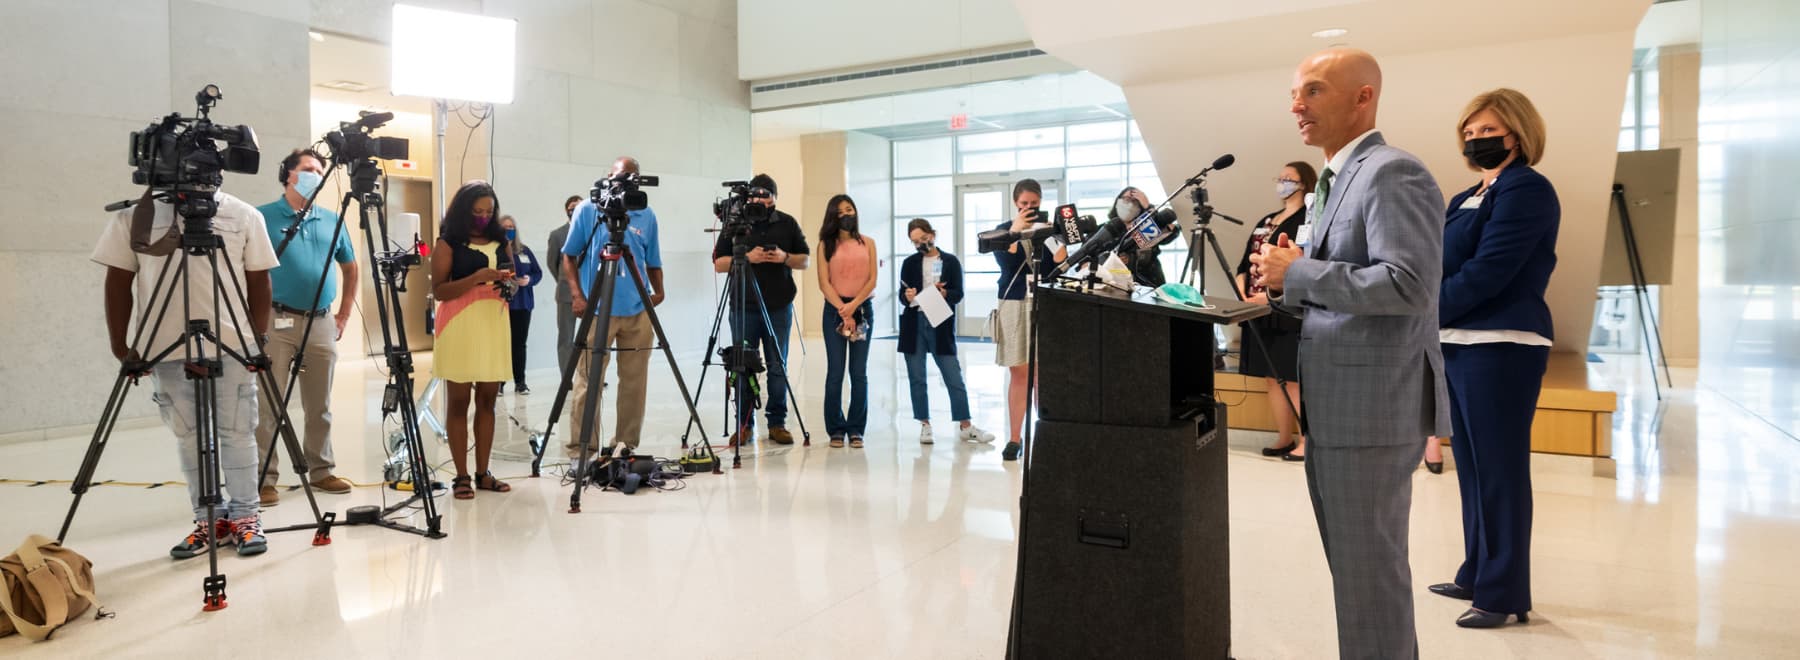 In the lobby of the School of Medicine, Dr. Alan Jones addresses a pool of reporters and accompanying videographers as Dr. LouAnn Woodward looks on.